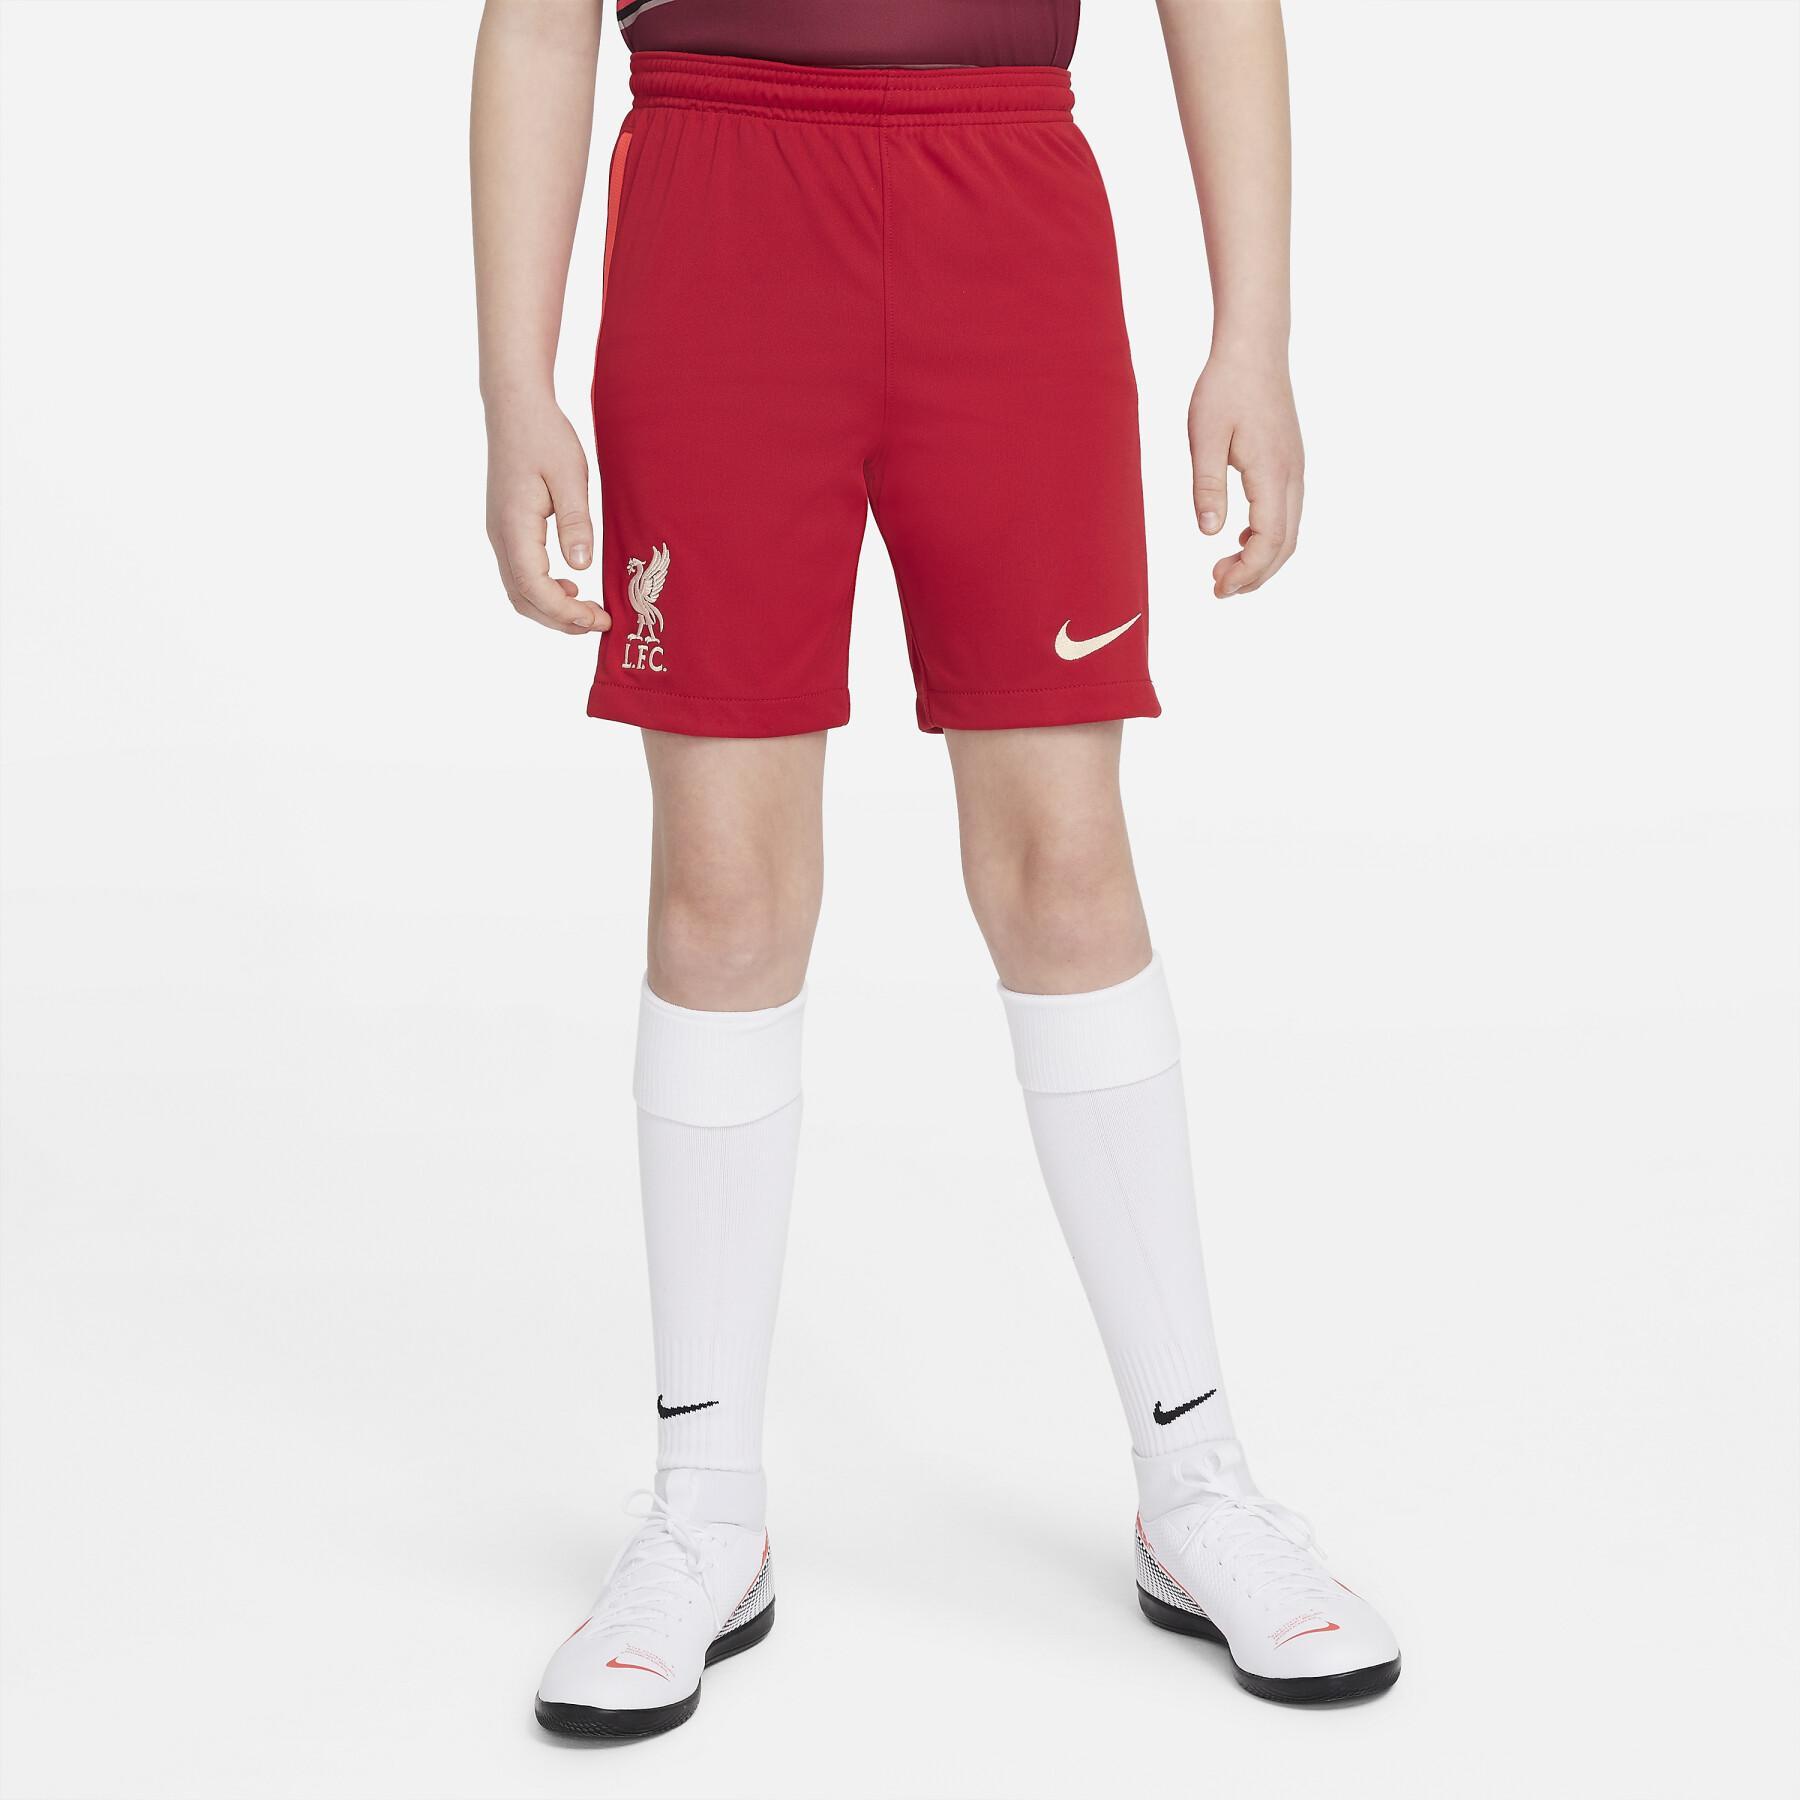 Short thuis kind Liverpool FC 2021/22